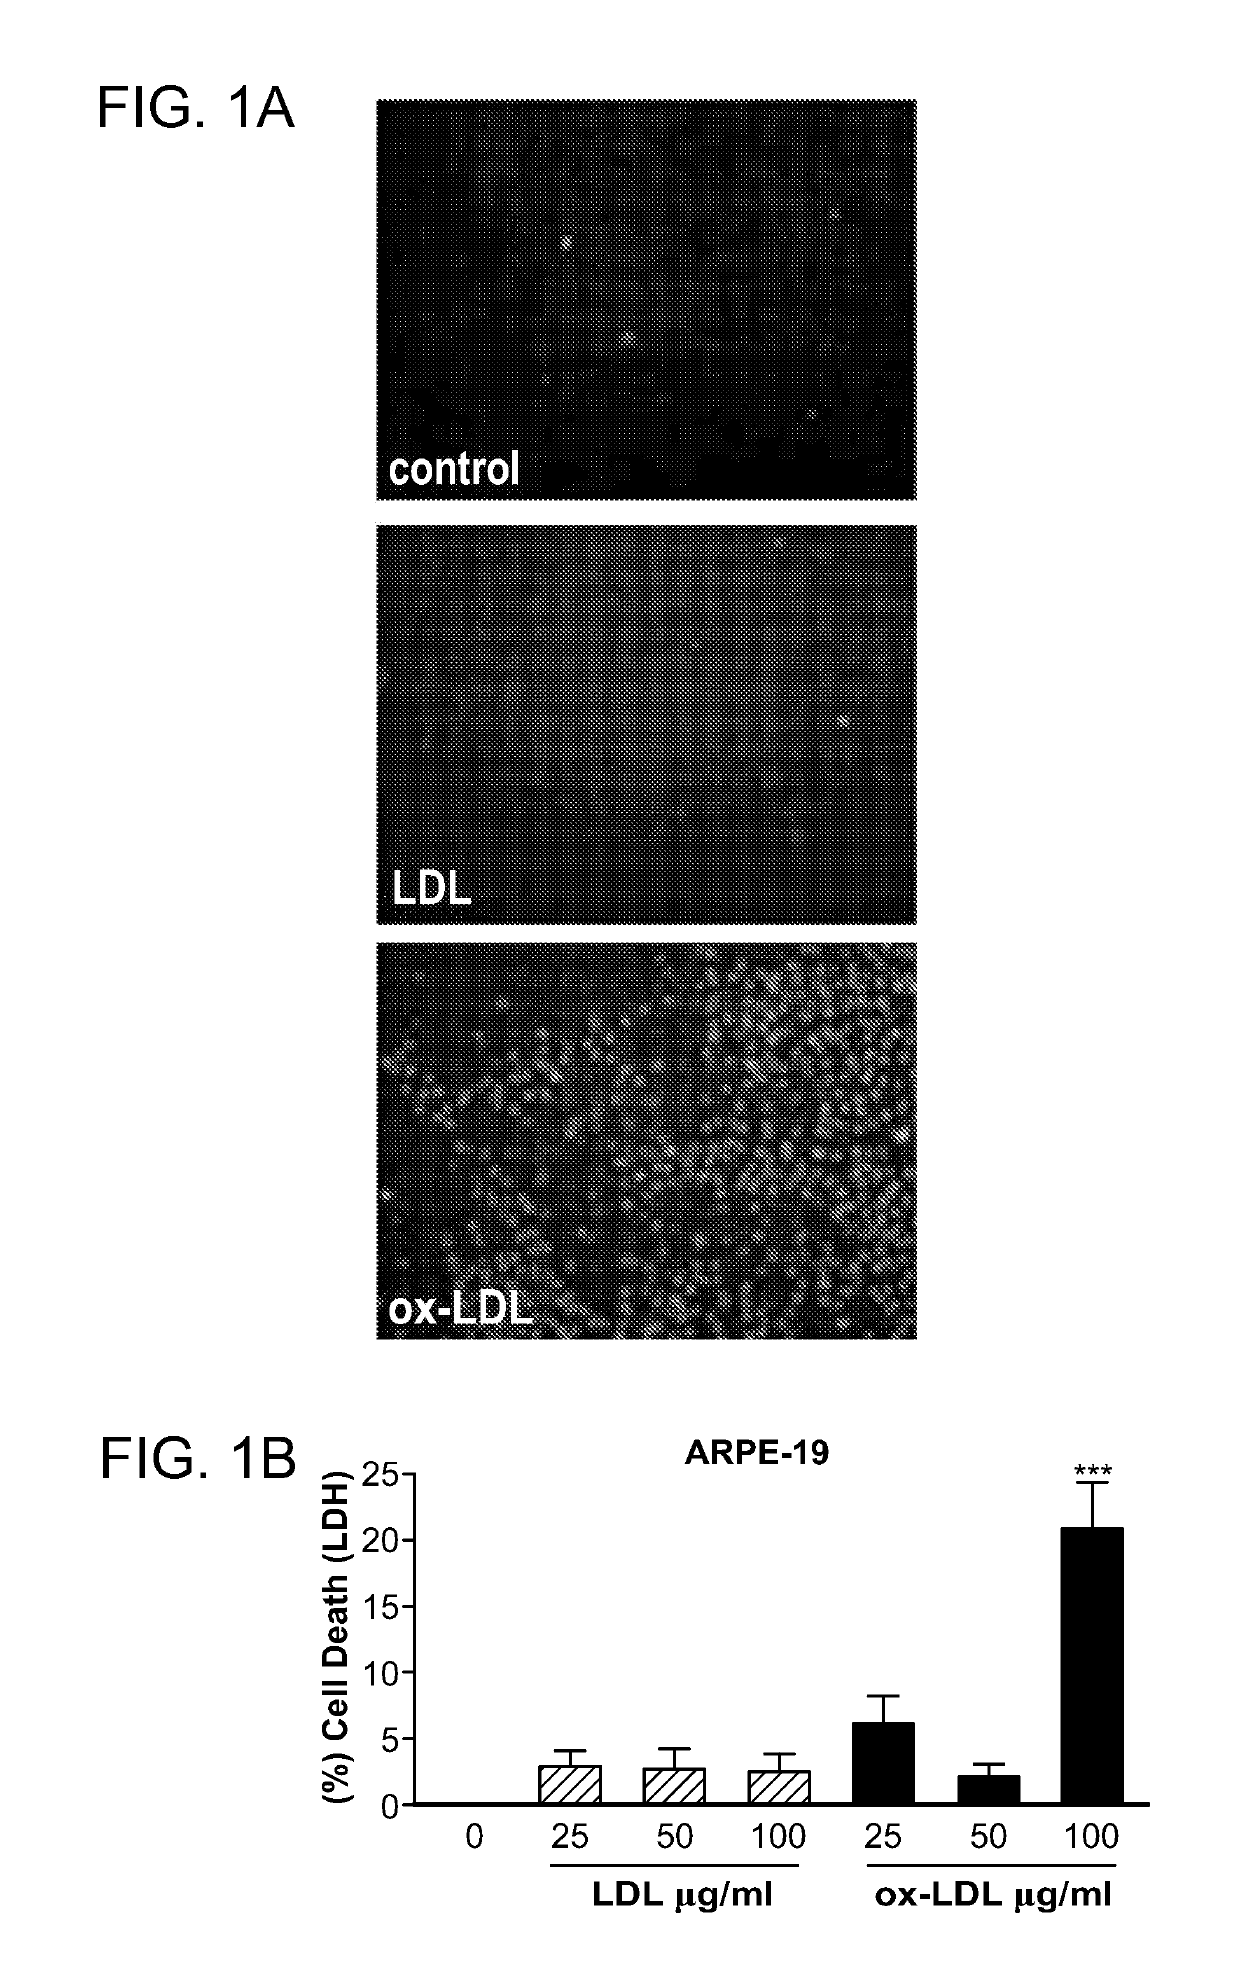 Peroxisome proliferator-activated receptor gamma selective agonists for inhibition of retinal pigment epithelium degeneration or geographic atrophy